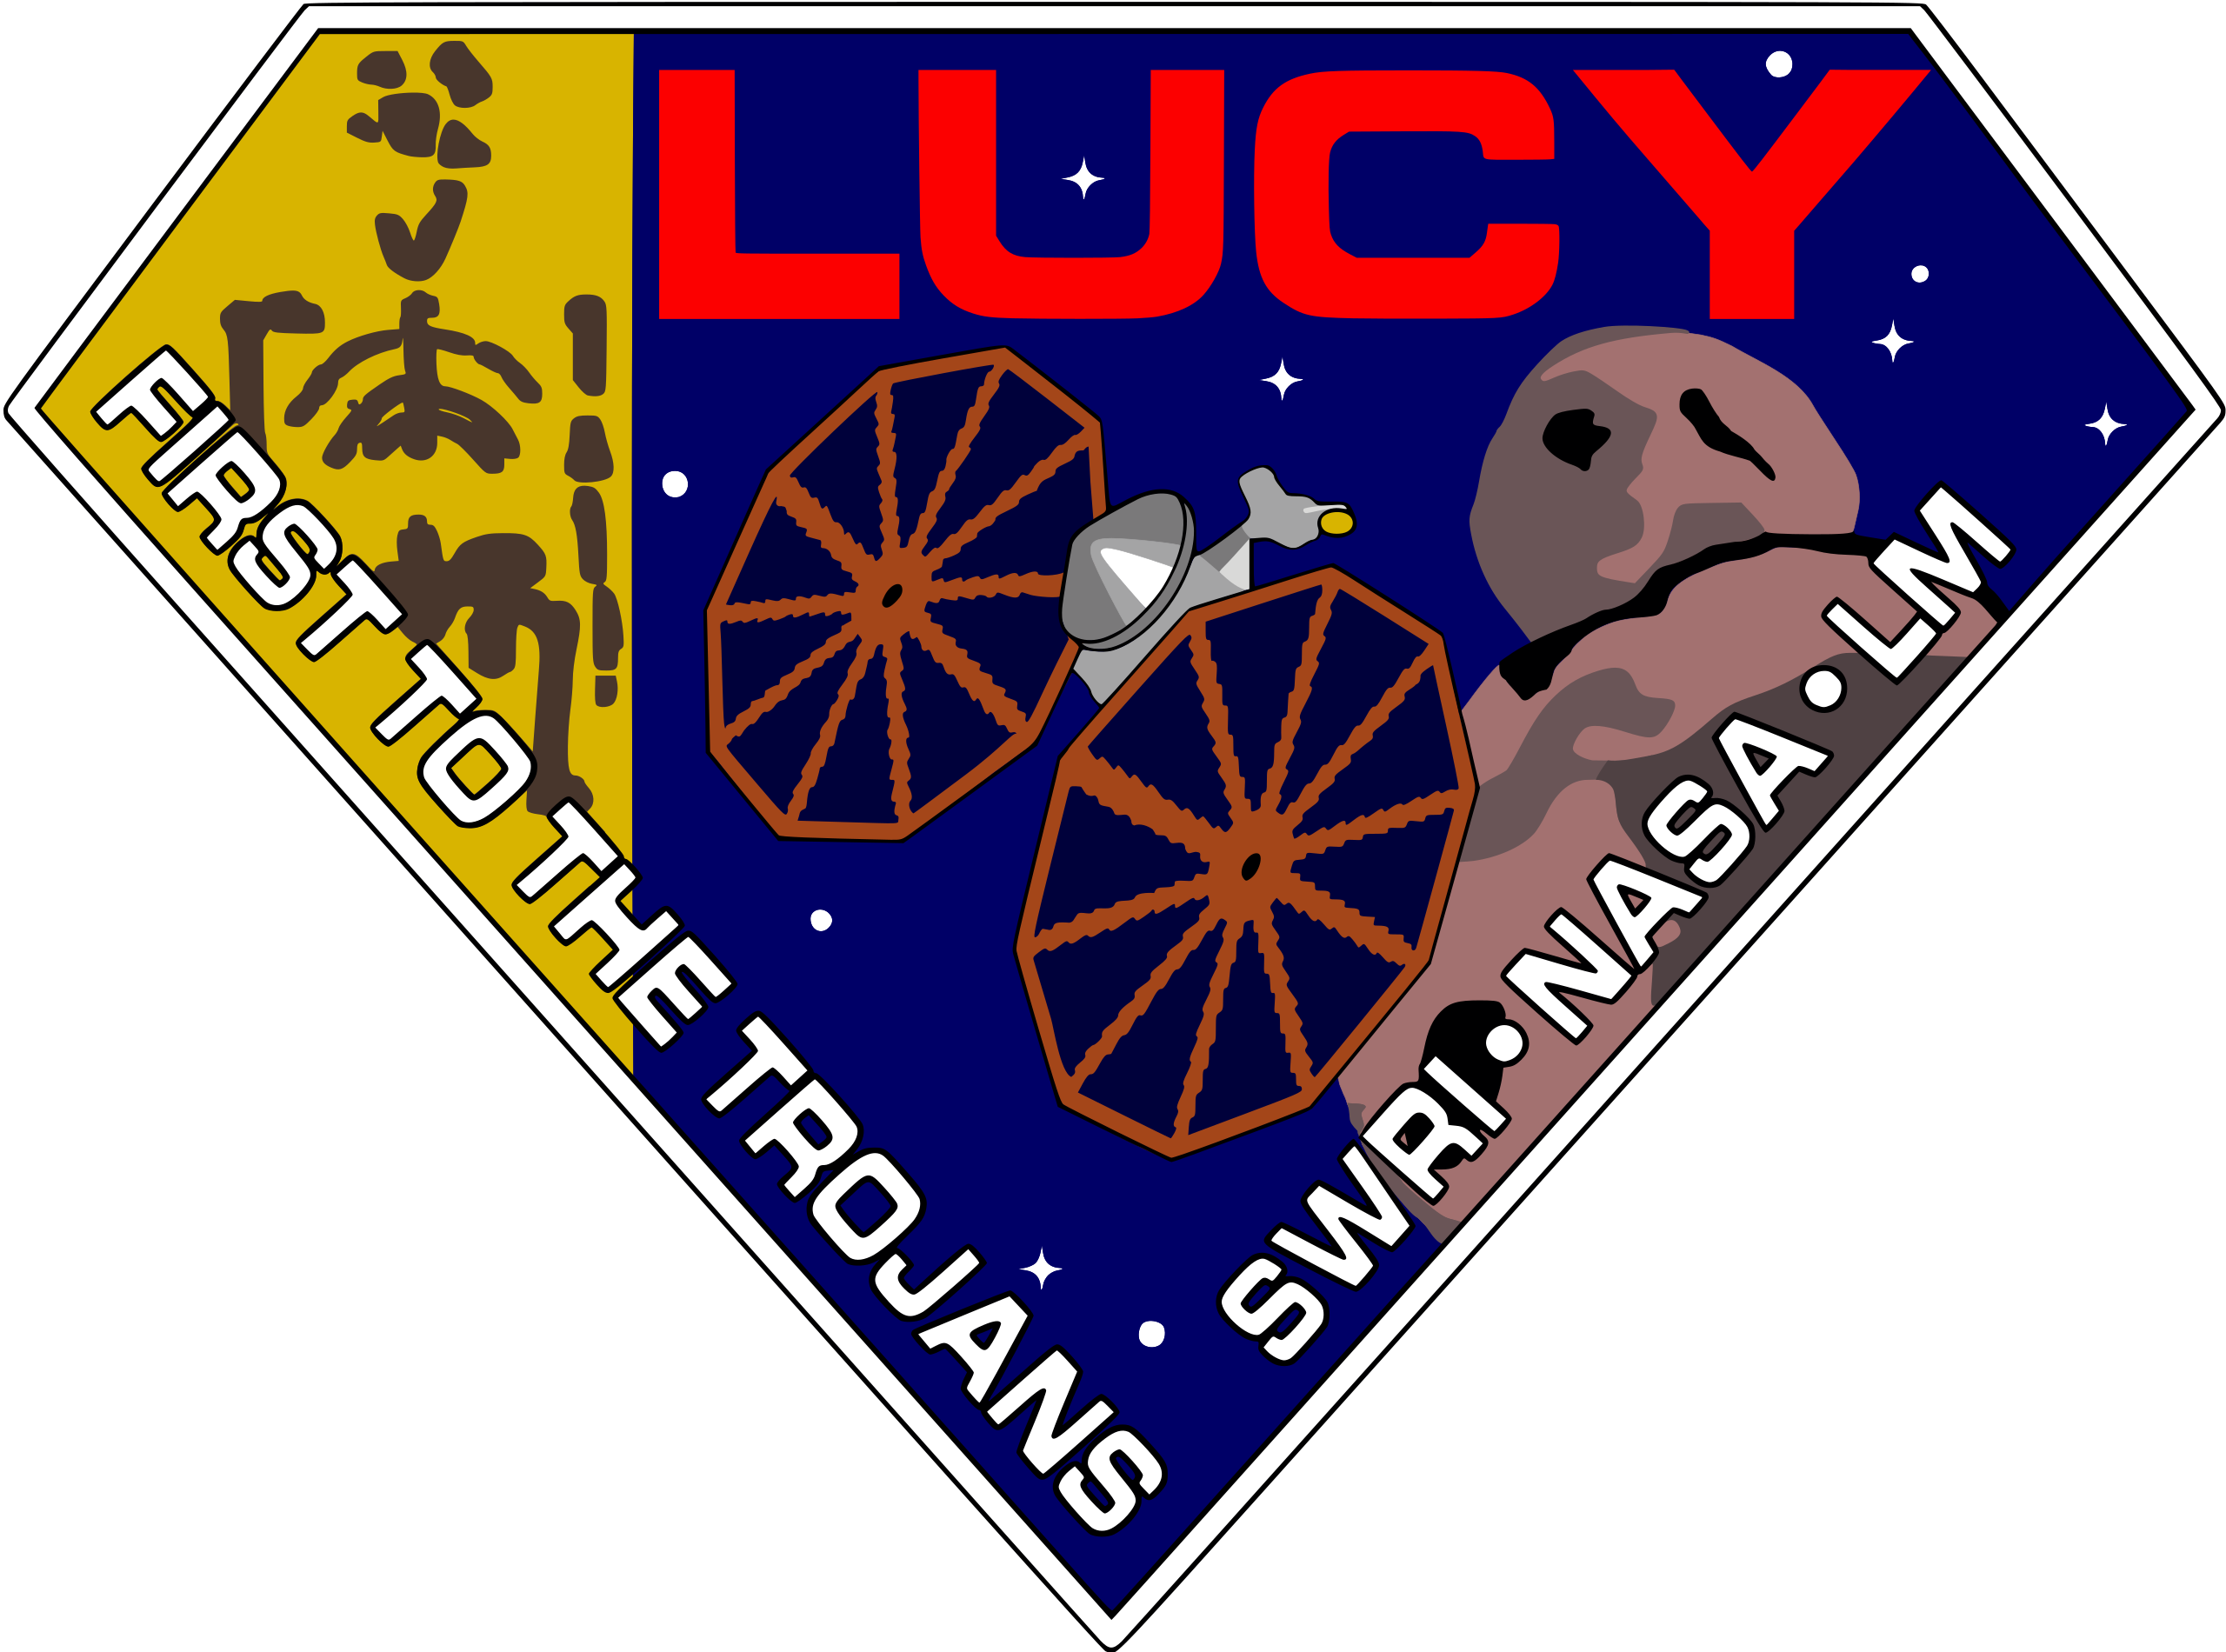 The Lucy logo says "first to the Trojan asteroids. It features an outline of the Lucy skeleton, the spacecraft and Trojan asteroids in the backgorund.